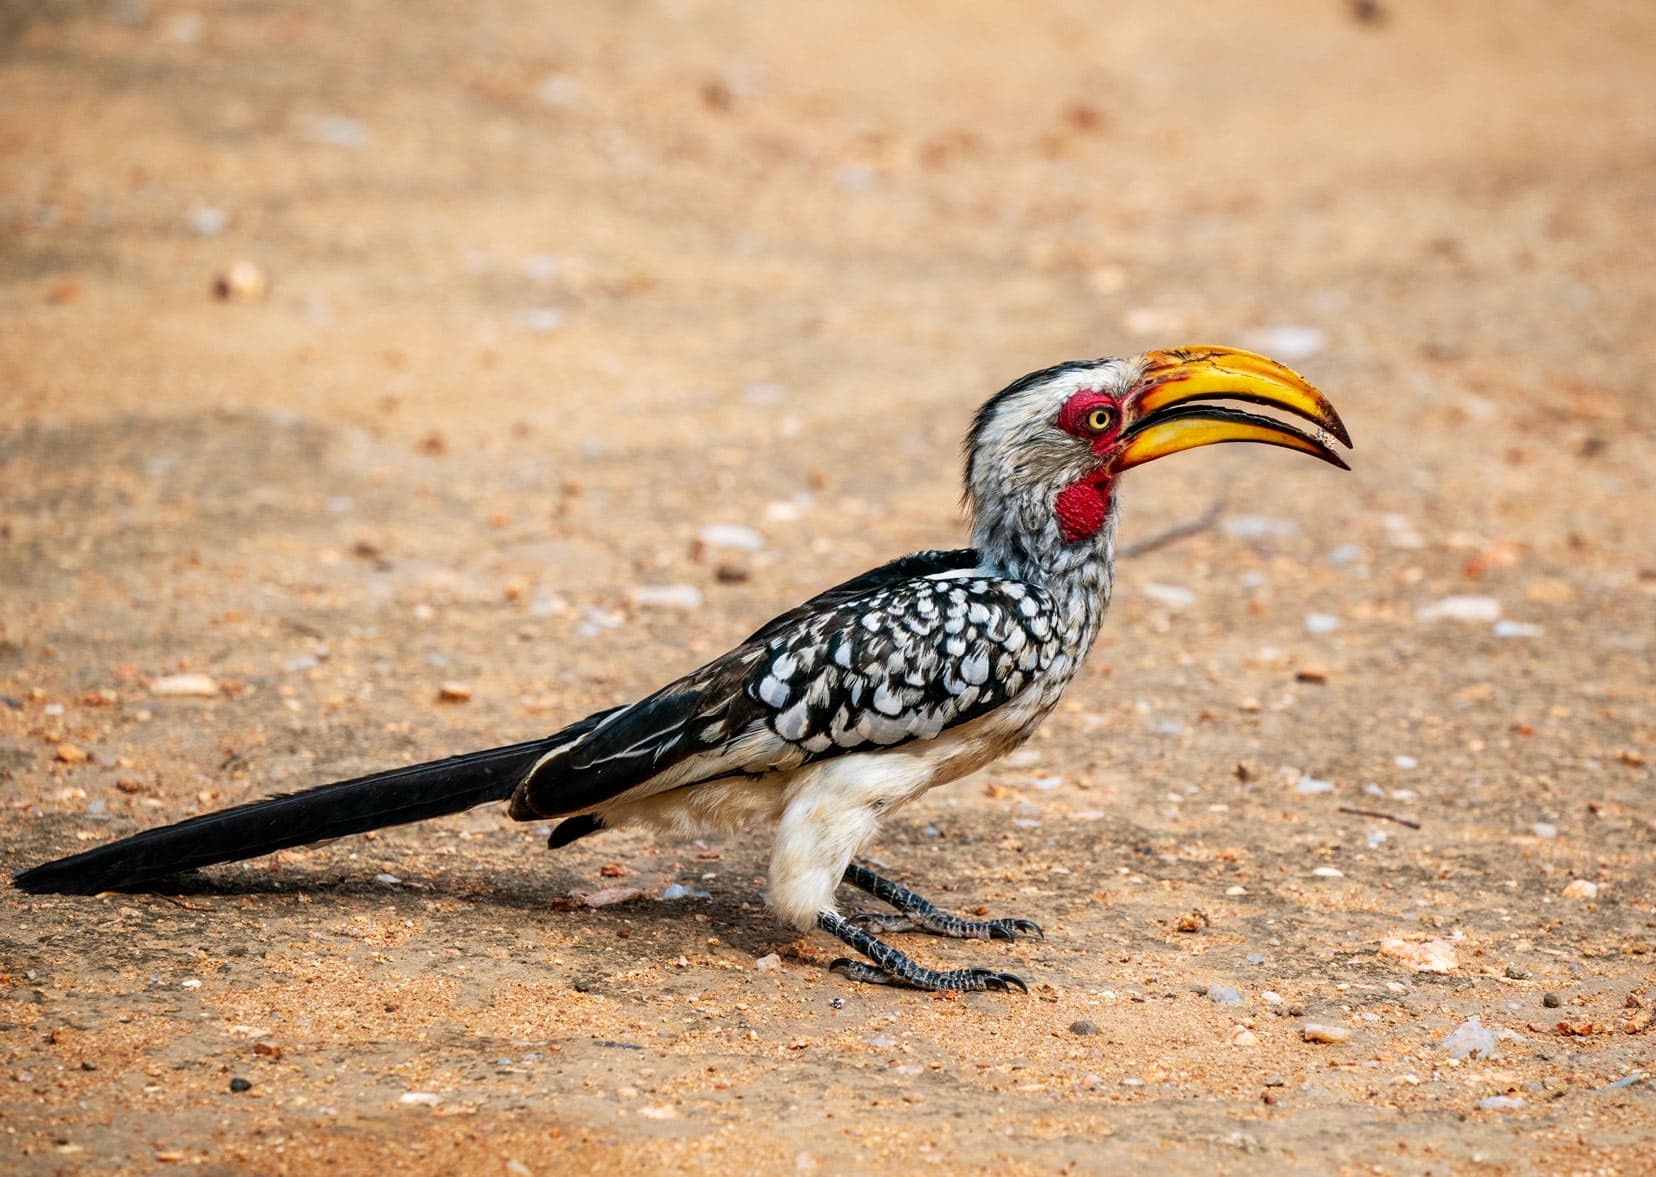 common bird in South Africa National Parks -medium sized bird with  large yellow beak, red eye and neck, and mottled black and white feathers stood on the sandy ground